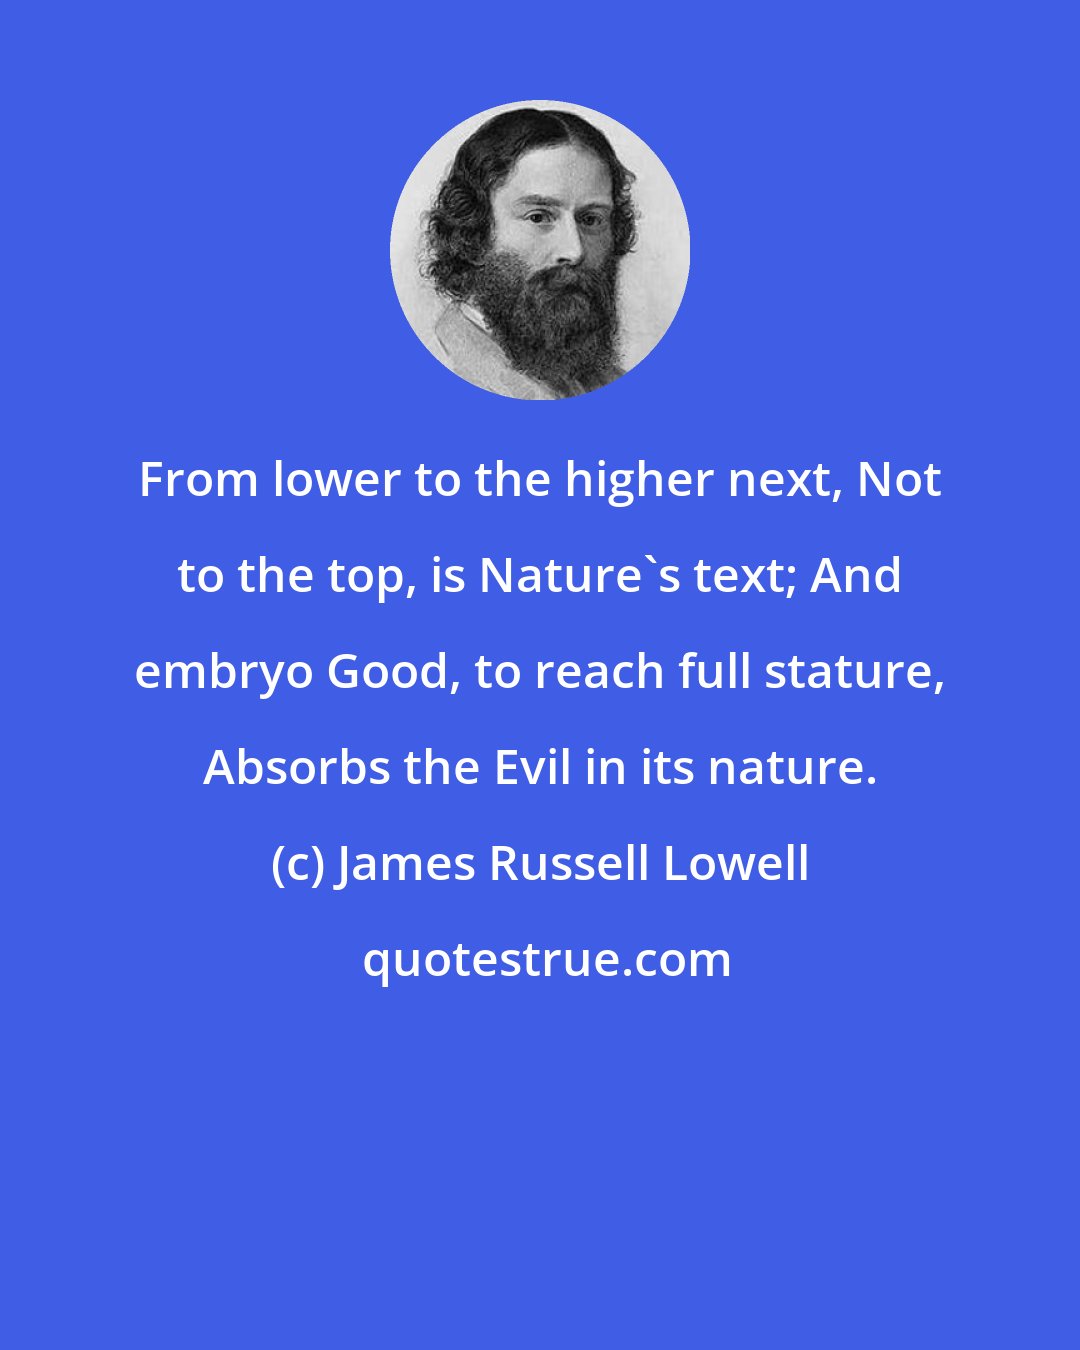 James Russell Lowell: From lower to the higher next, Not to the top, is Nature's text; And embryo Good, to reach full stature, Absorbs the Evil in its nature.